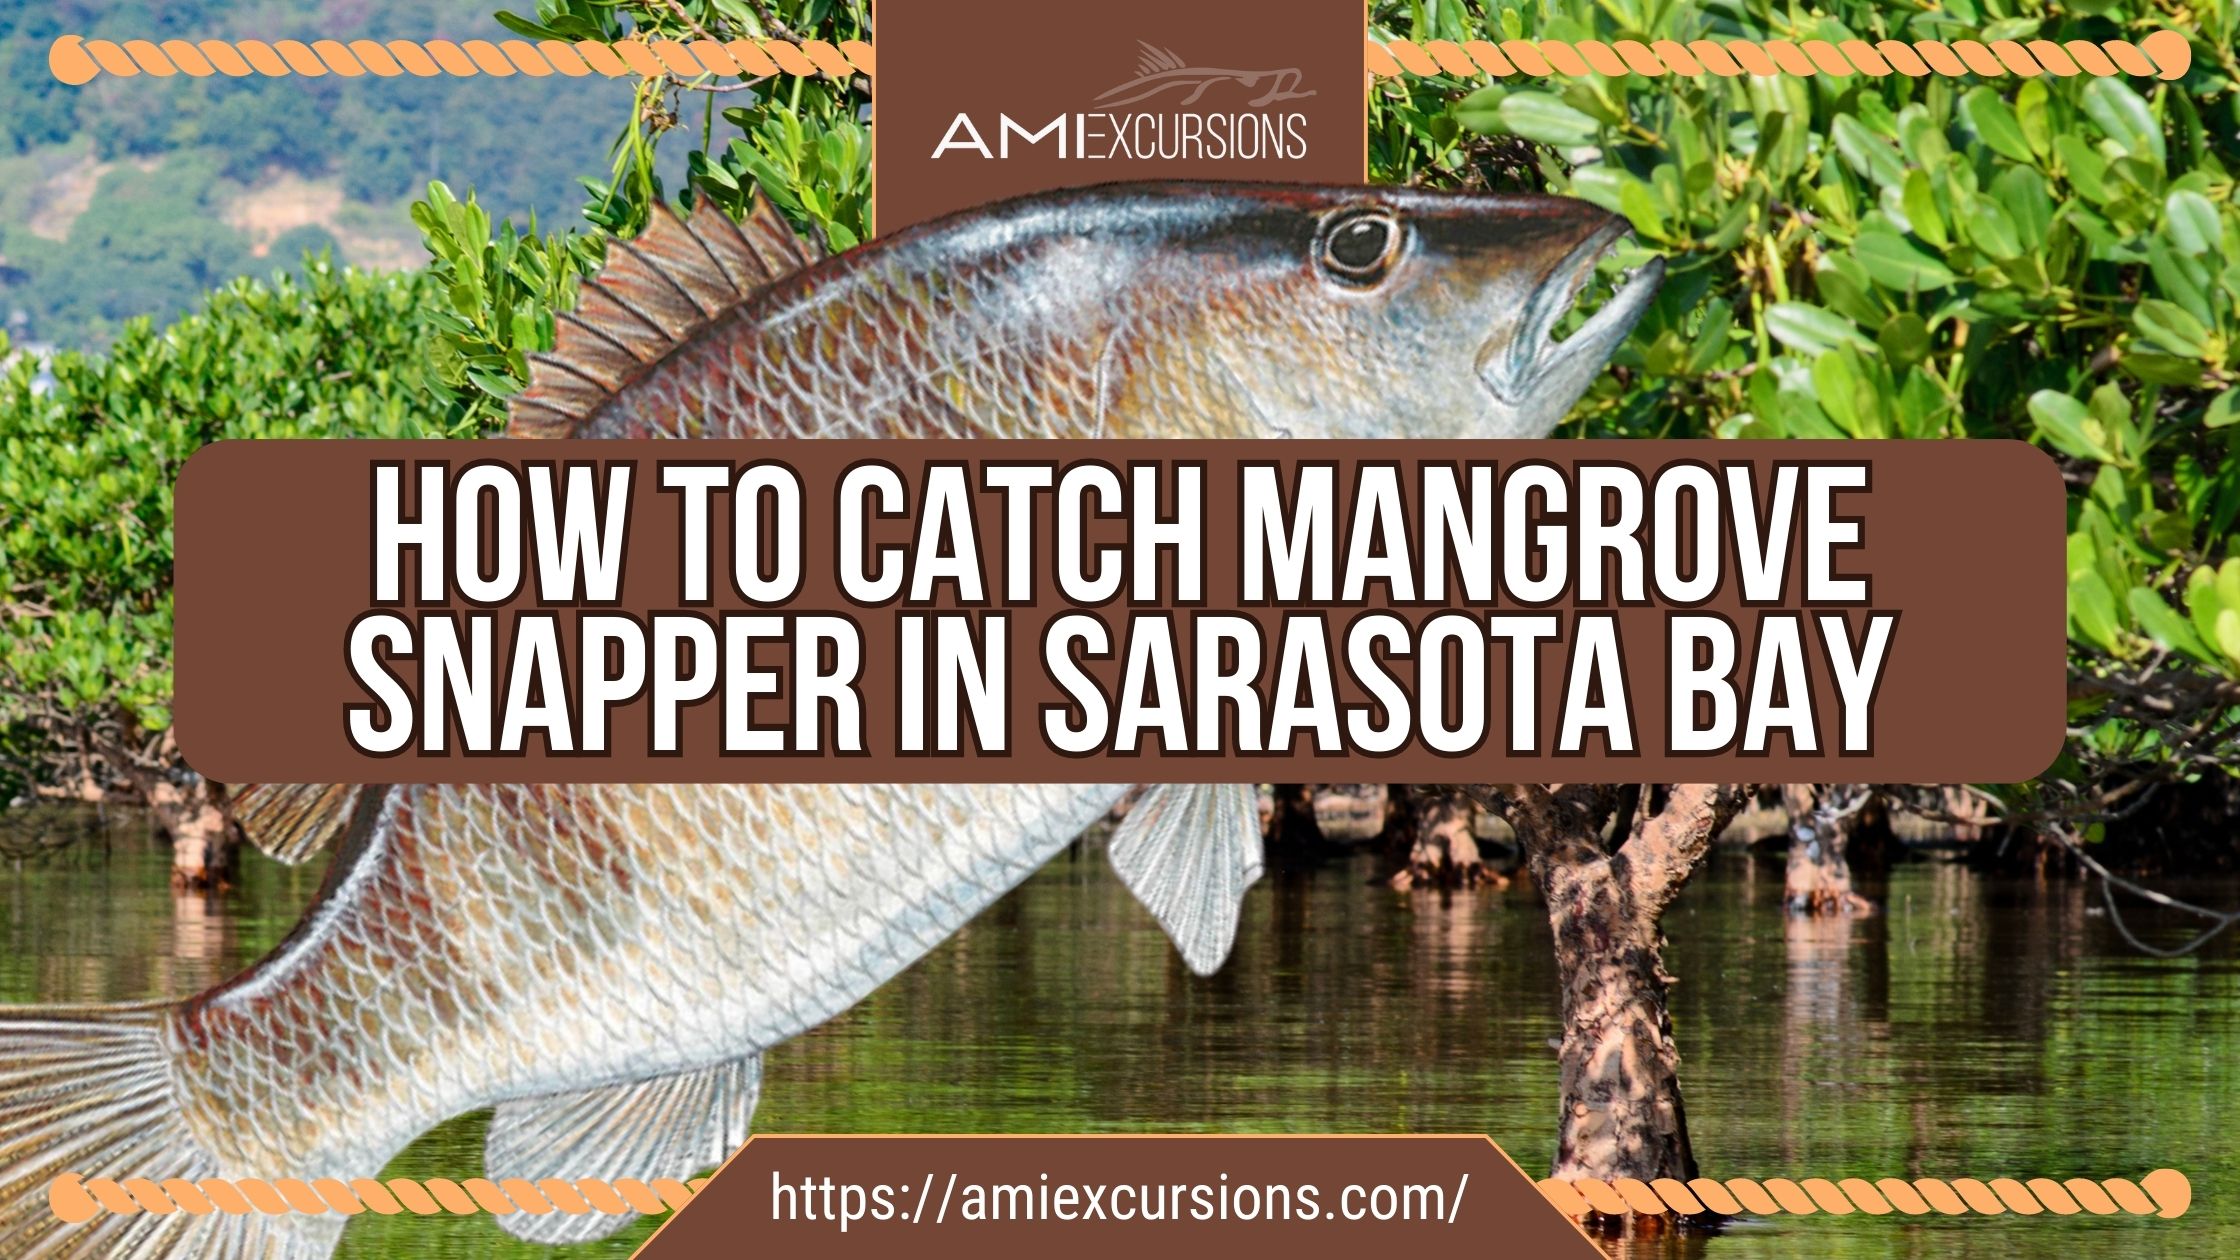 How To Catch Mangrove Snapper In Sarasota Bay